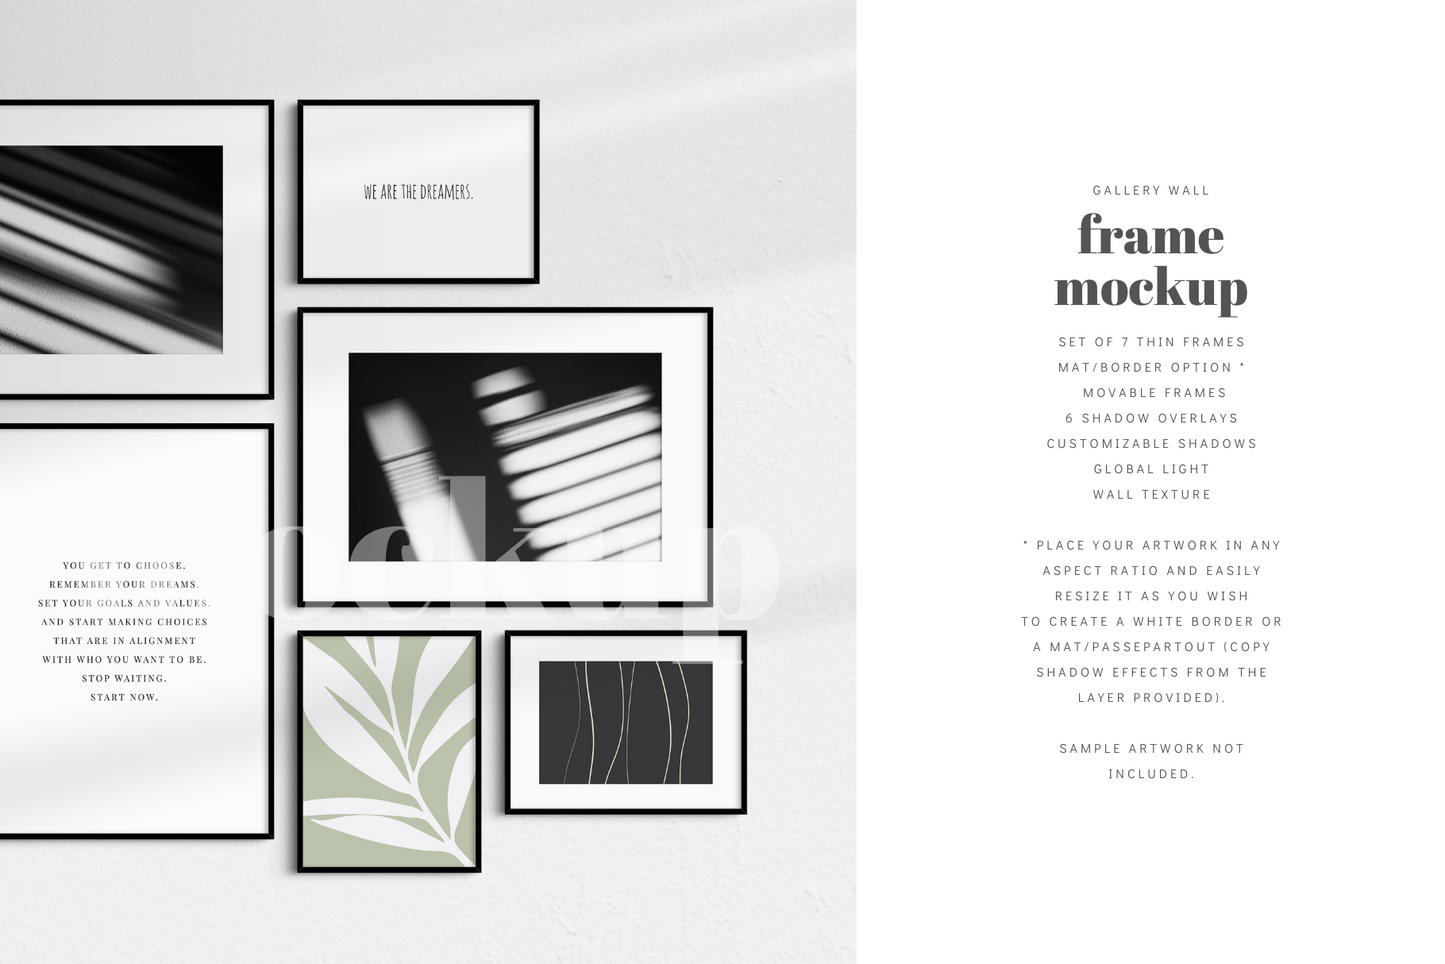 Showcase your artwork in an elegant, modern way with this customizable and easy-to-use minimalist gallery wall frame mockup that features a set of 7 thin black frames.